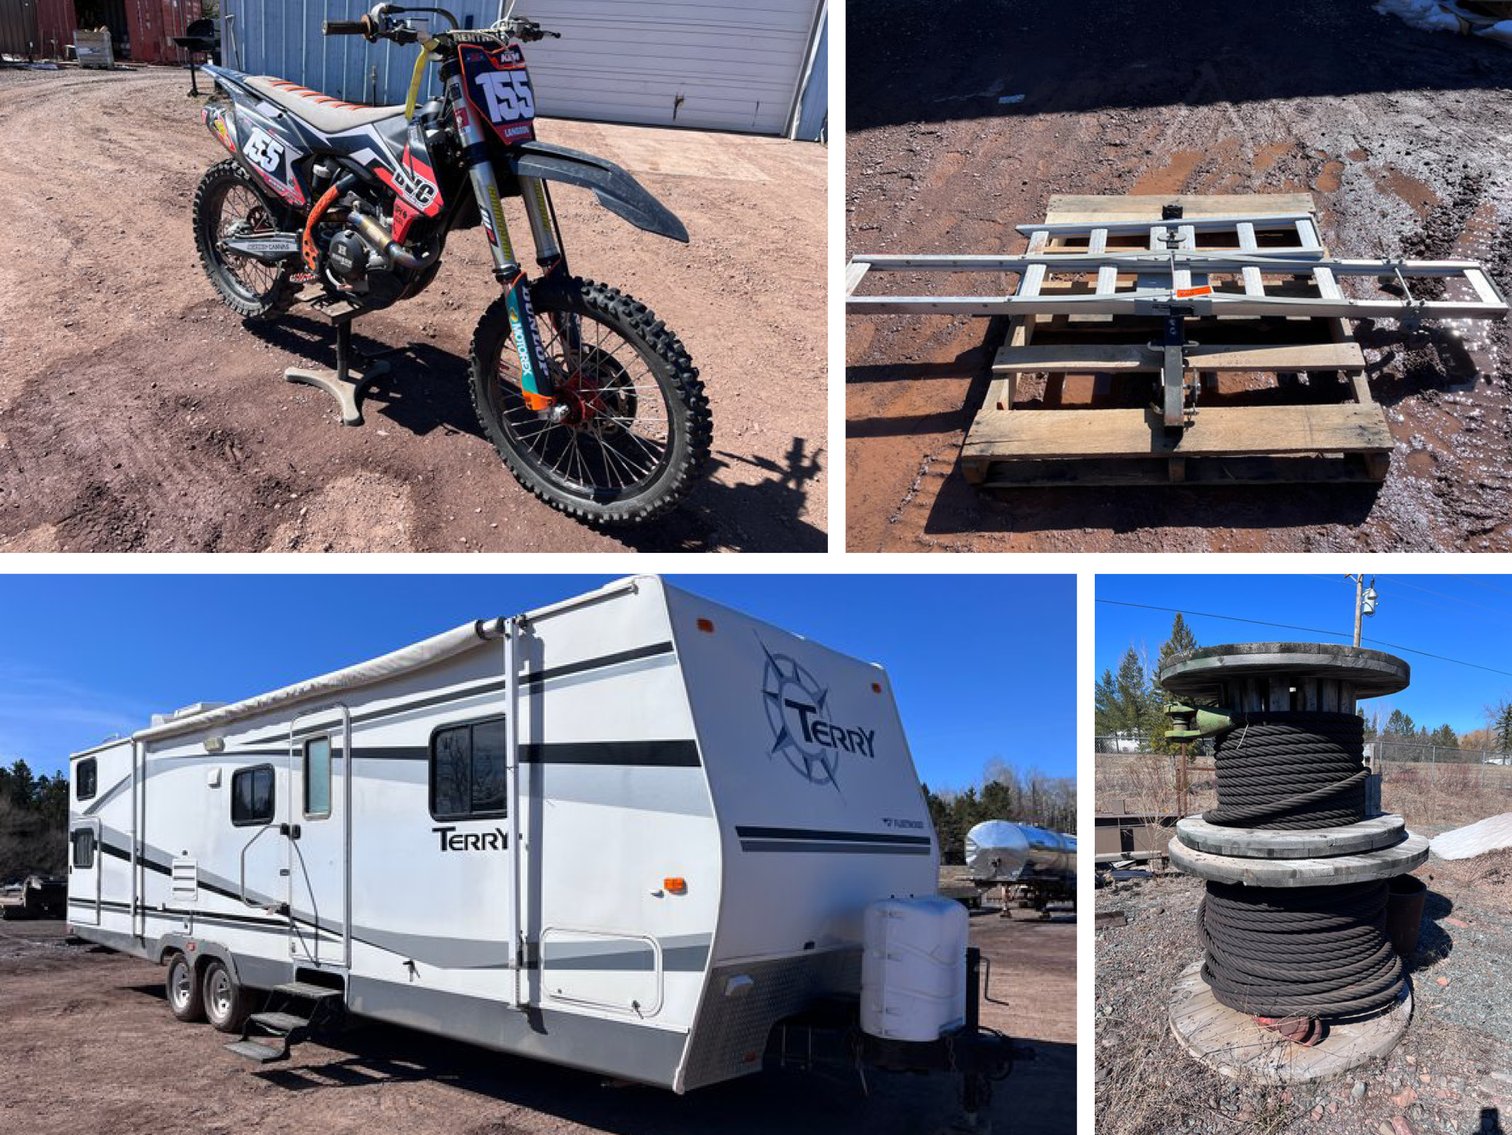 2006 Terry by Fleetwood 32' Camper, 2017 450-SX-F Dirt Bike, Motorcycle Carrier & Cable Rolls